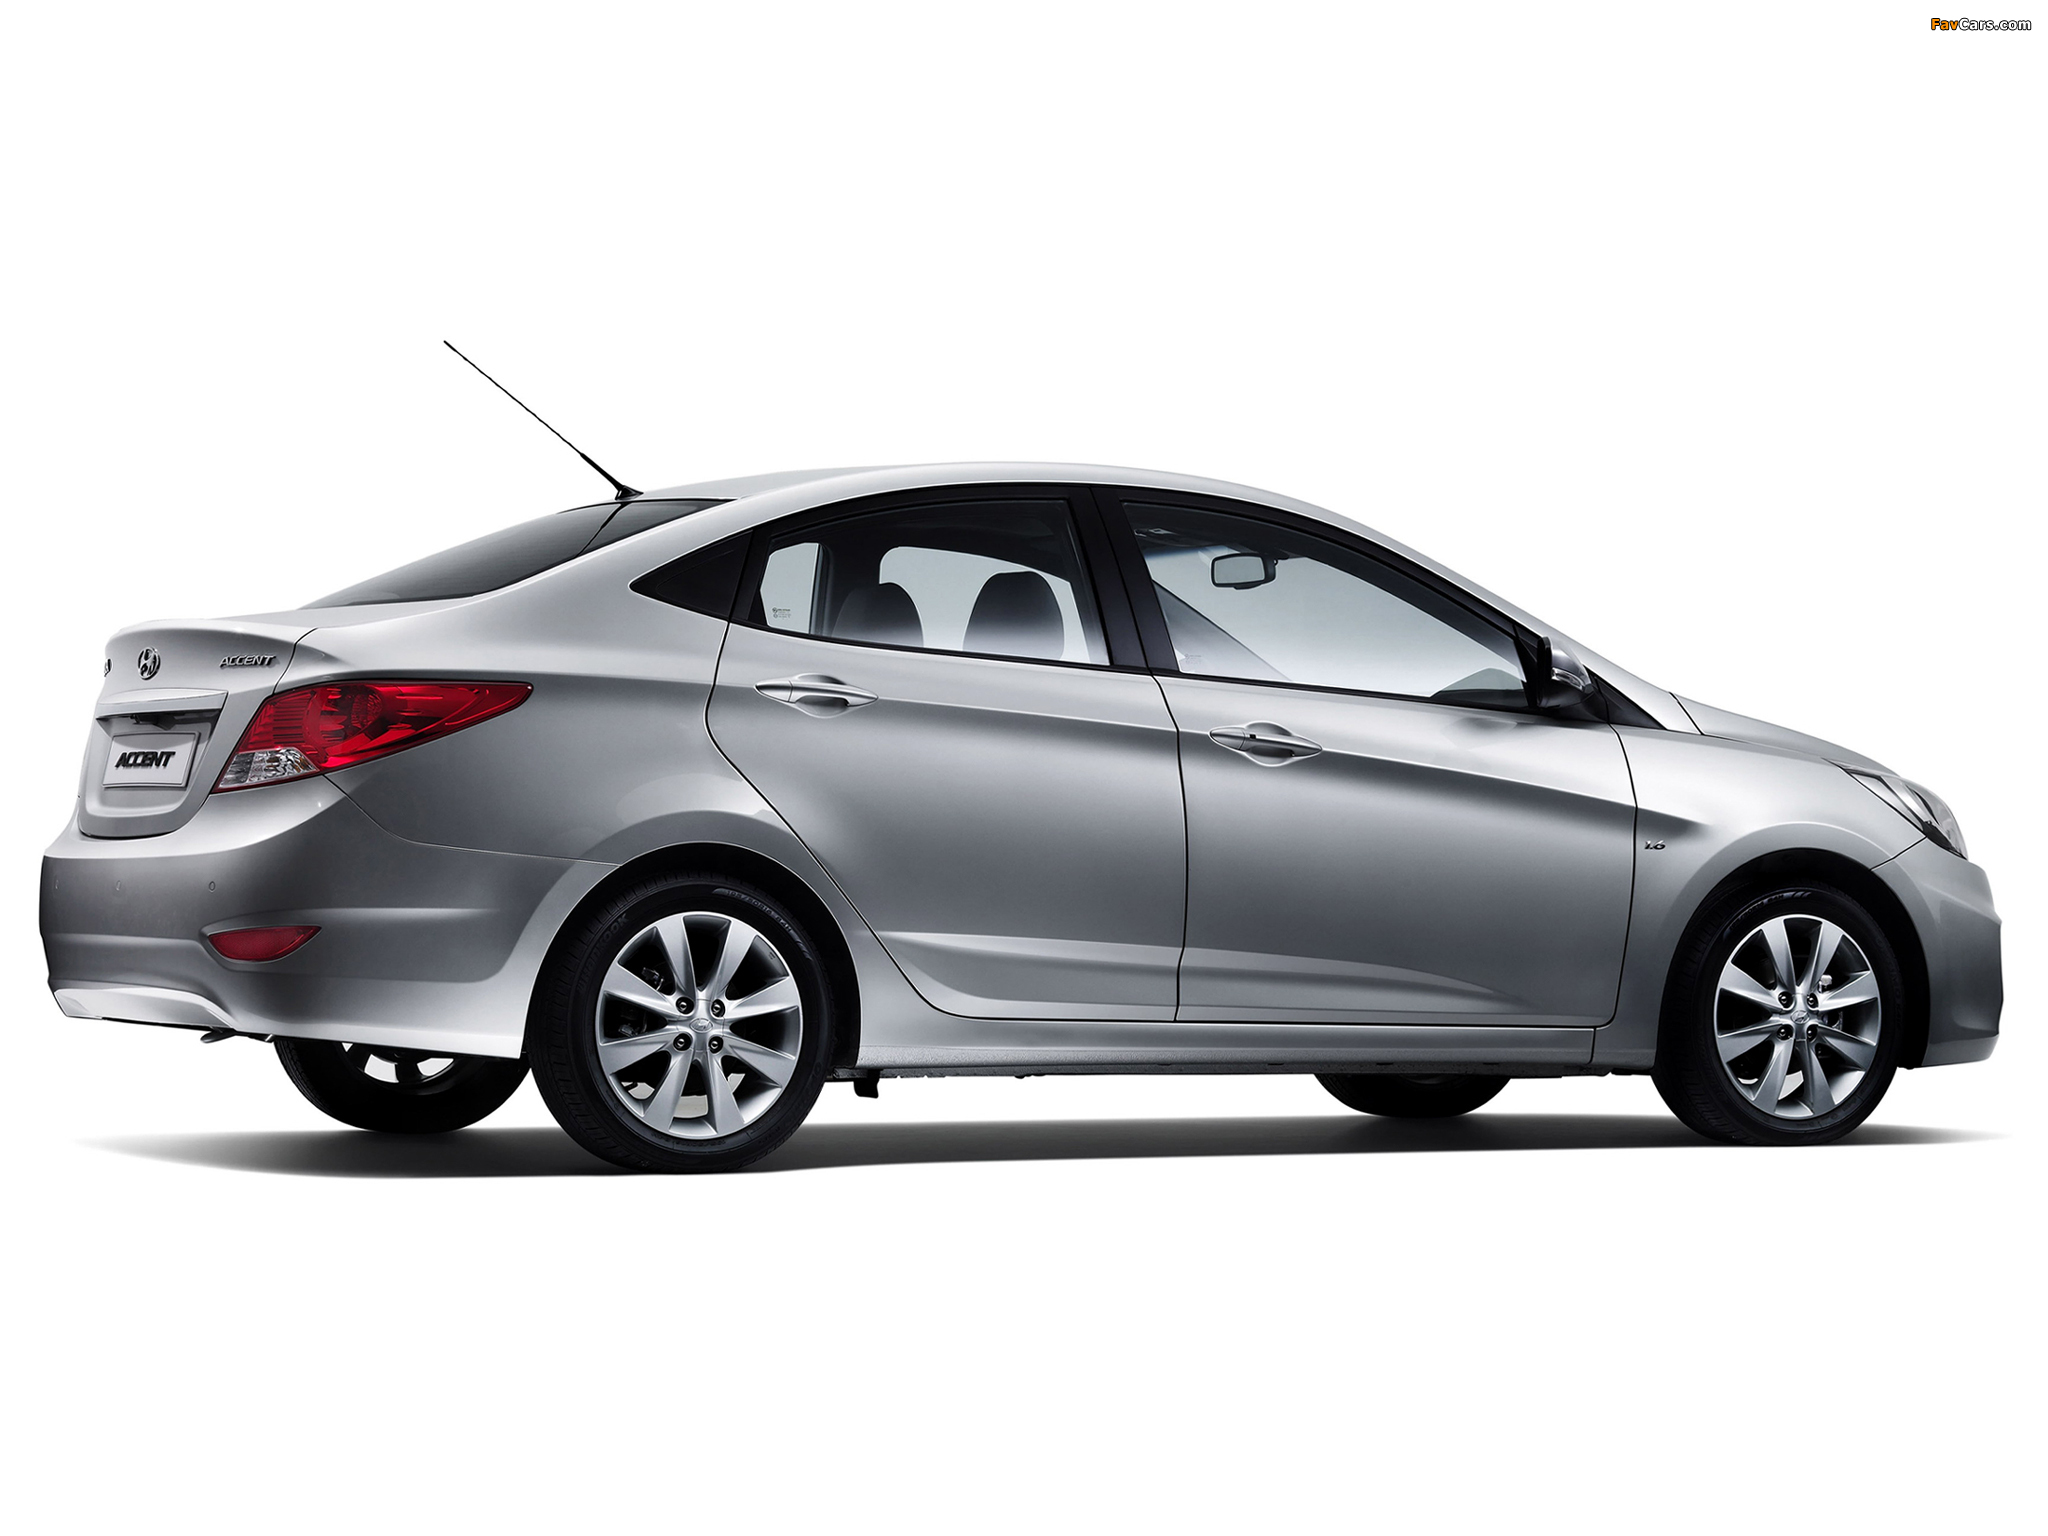 Pictures of Hyundai Accent (RB) 2010 (2048x1536)